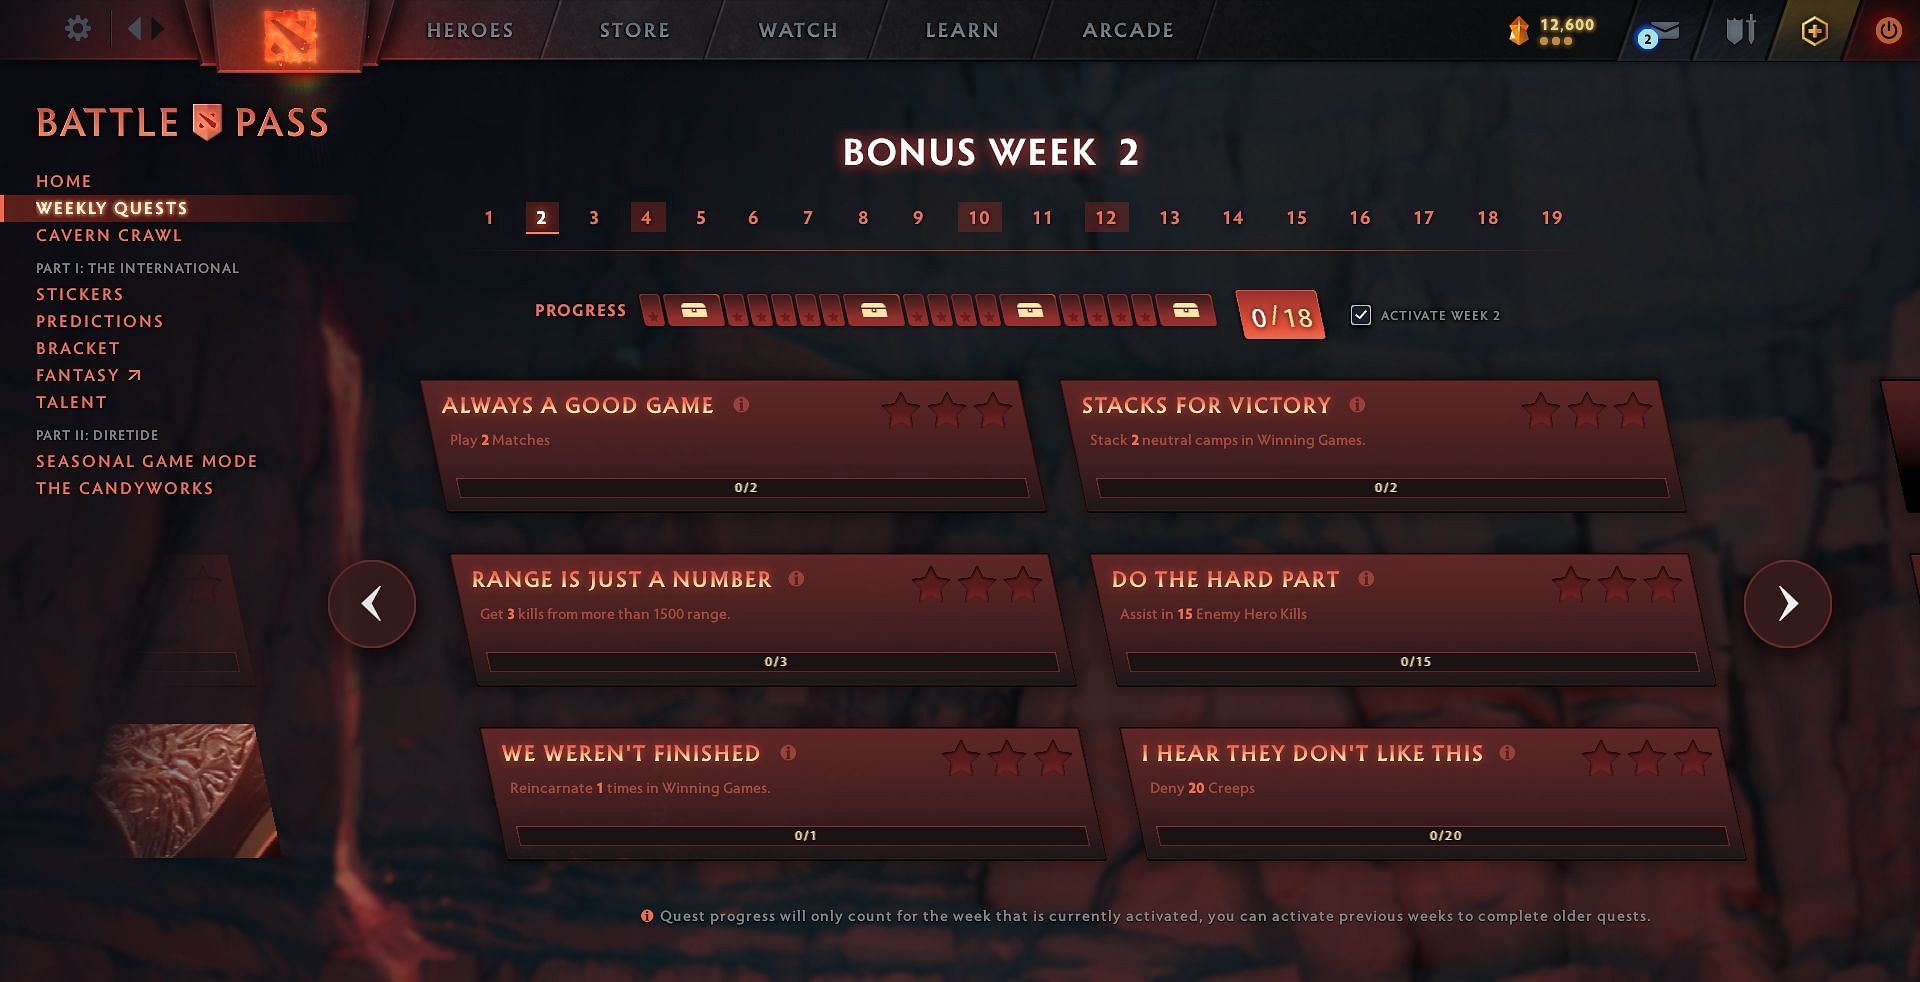 Weekly objectives in the Battle Pass that are added (Image via DOTA 2)